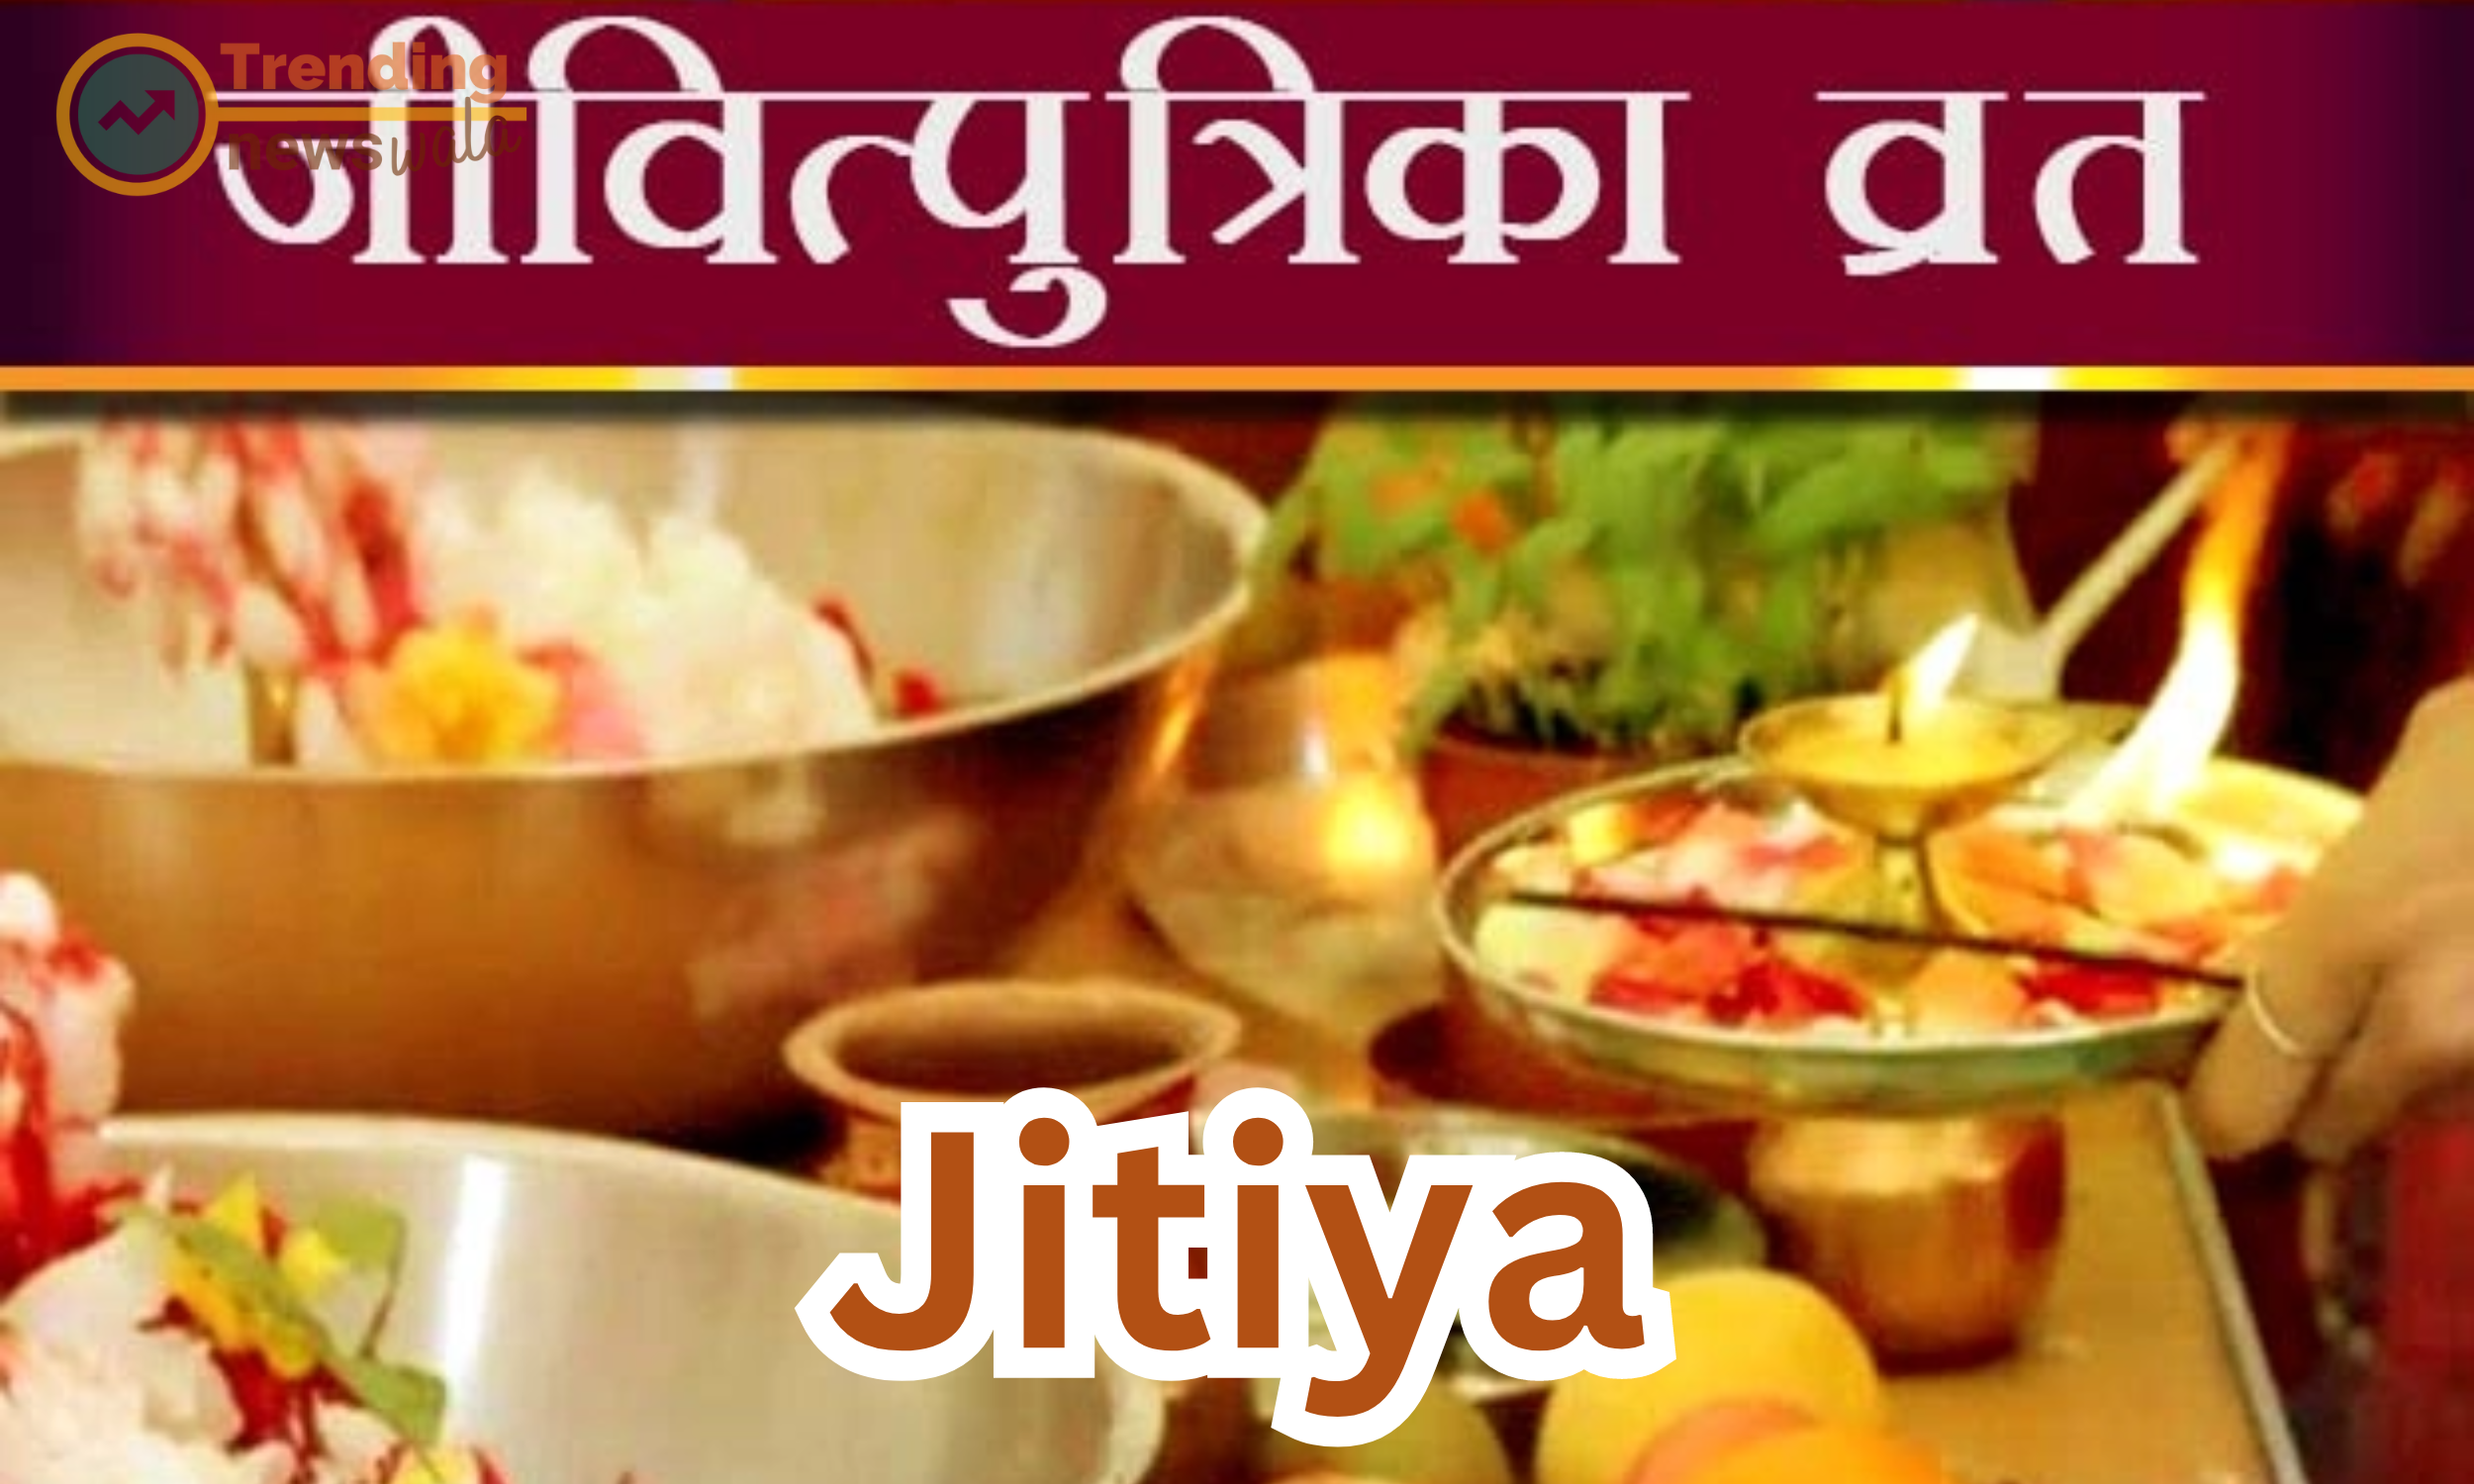 Jitiya is the observance of Vrat by mothers